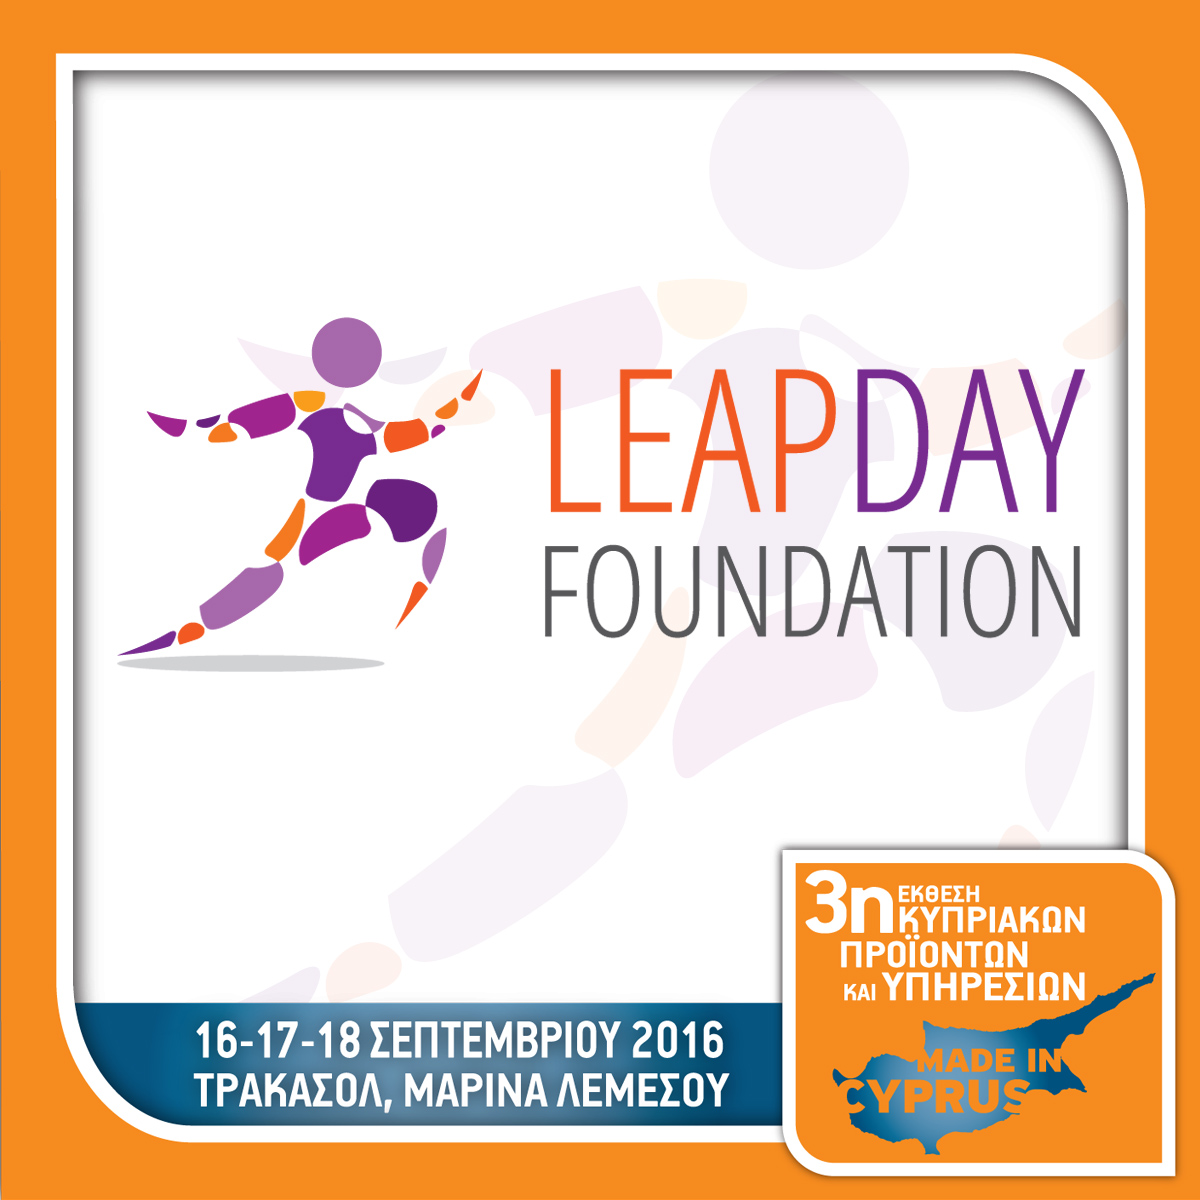 Leap Day Foundation - Stand No 58